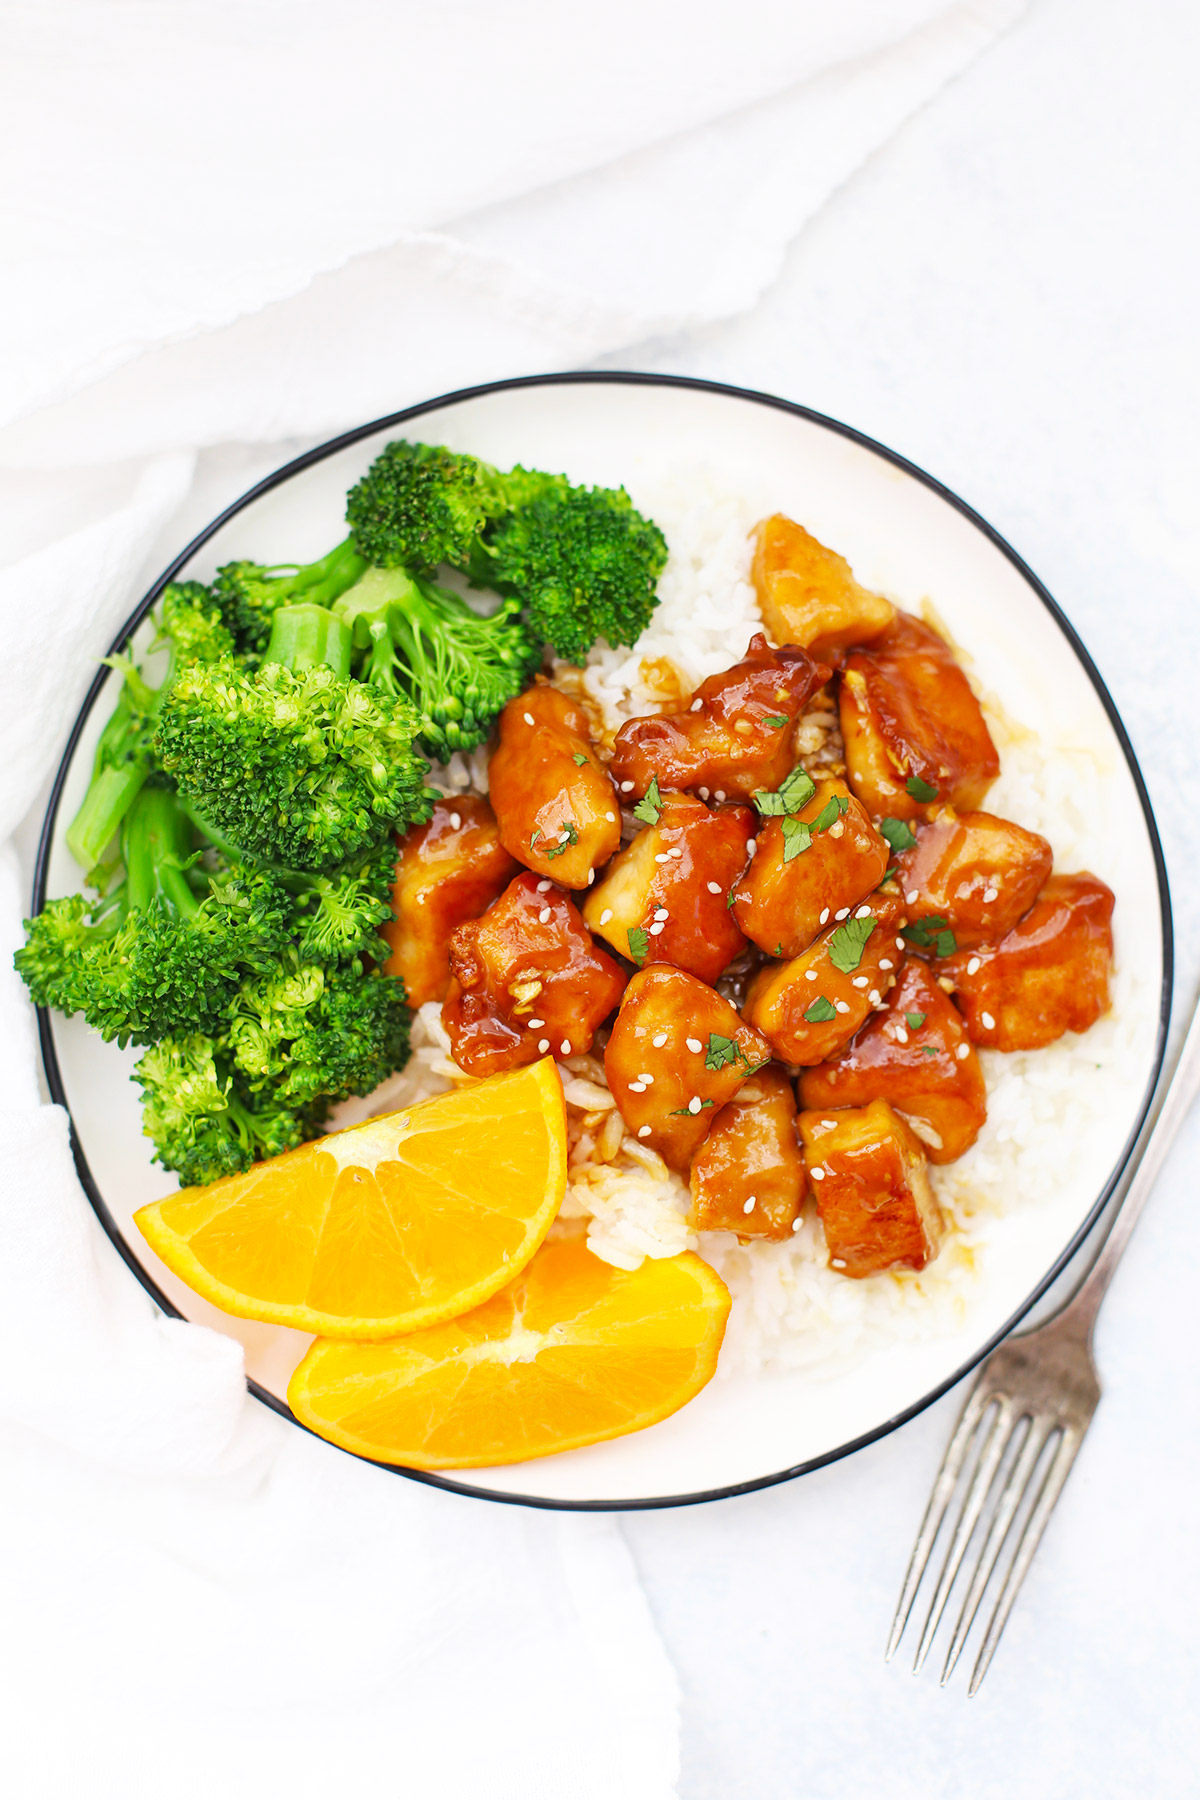 Overhead view of a plate with healthy orange chicken, rice, orange wedges and steamed broccoli on a white background